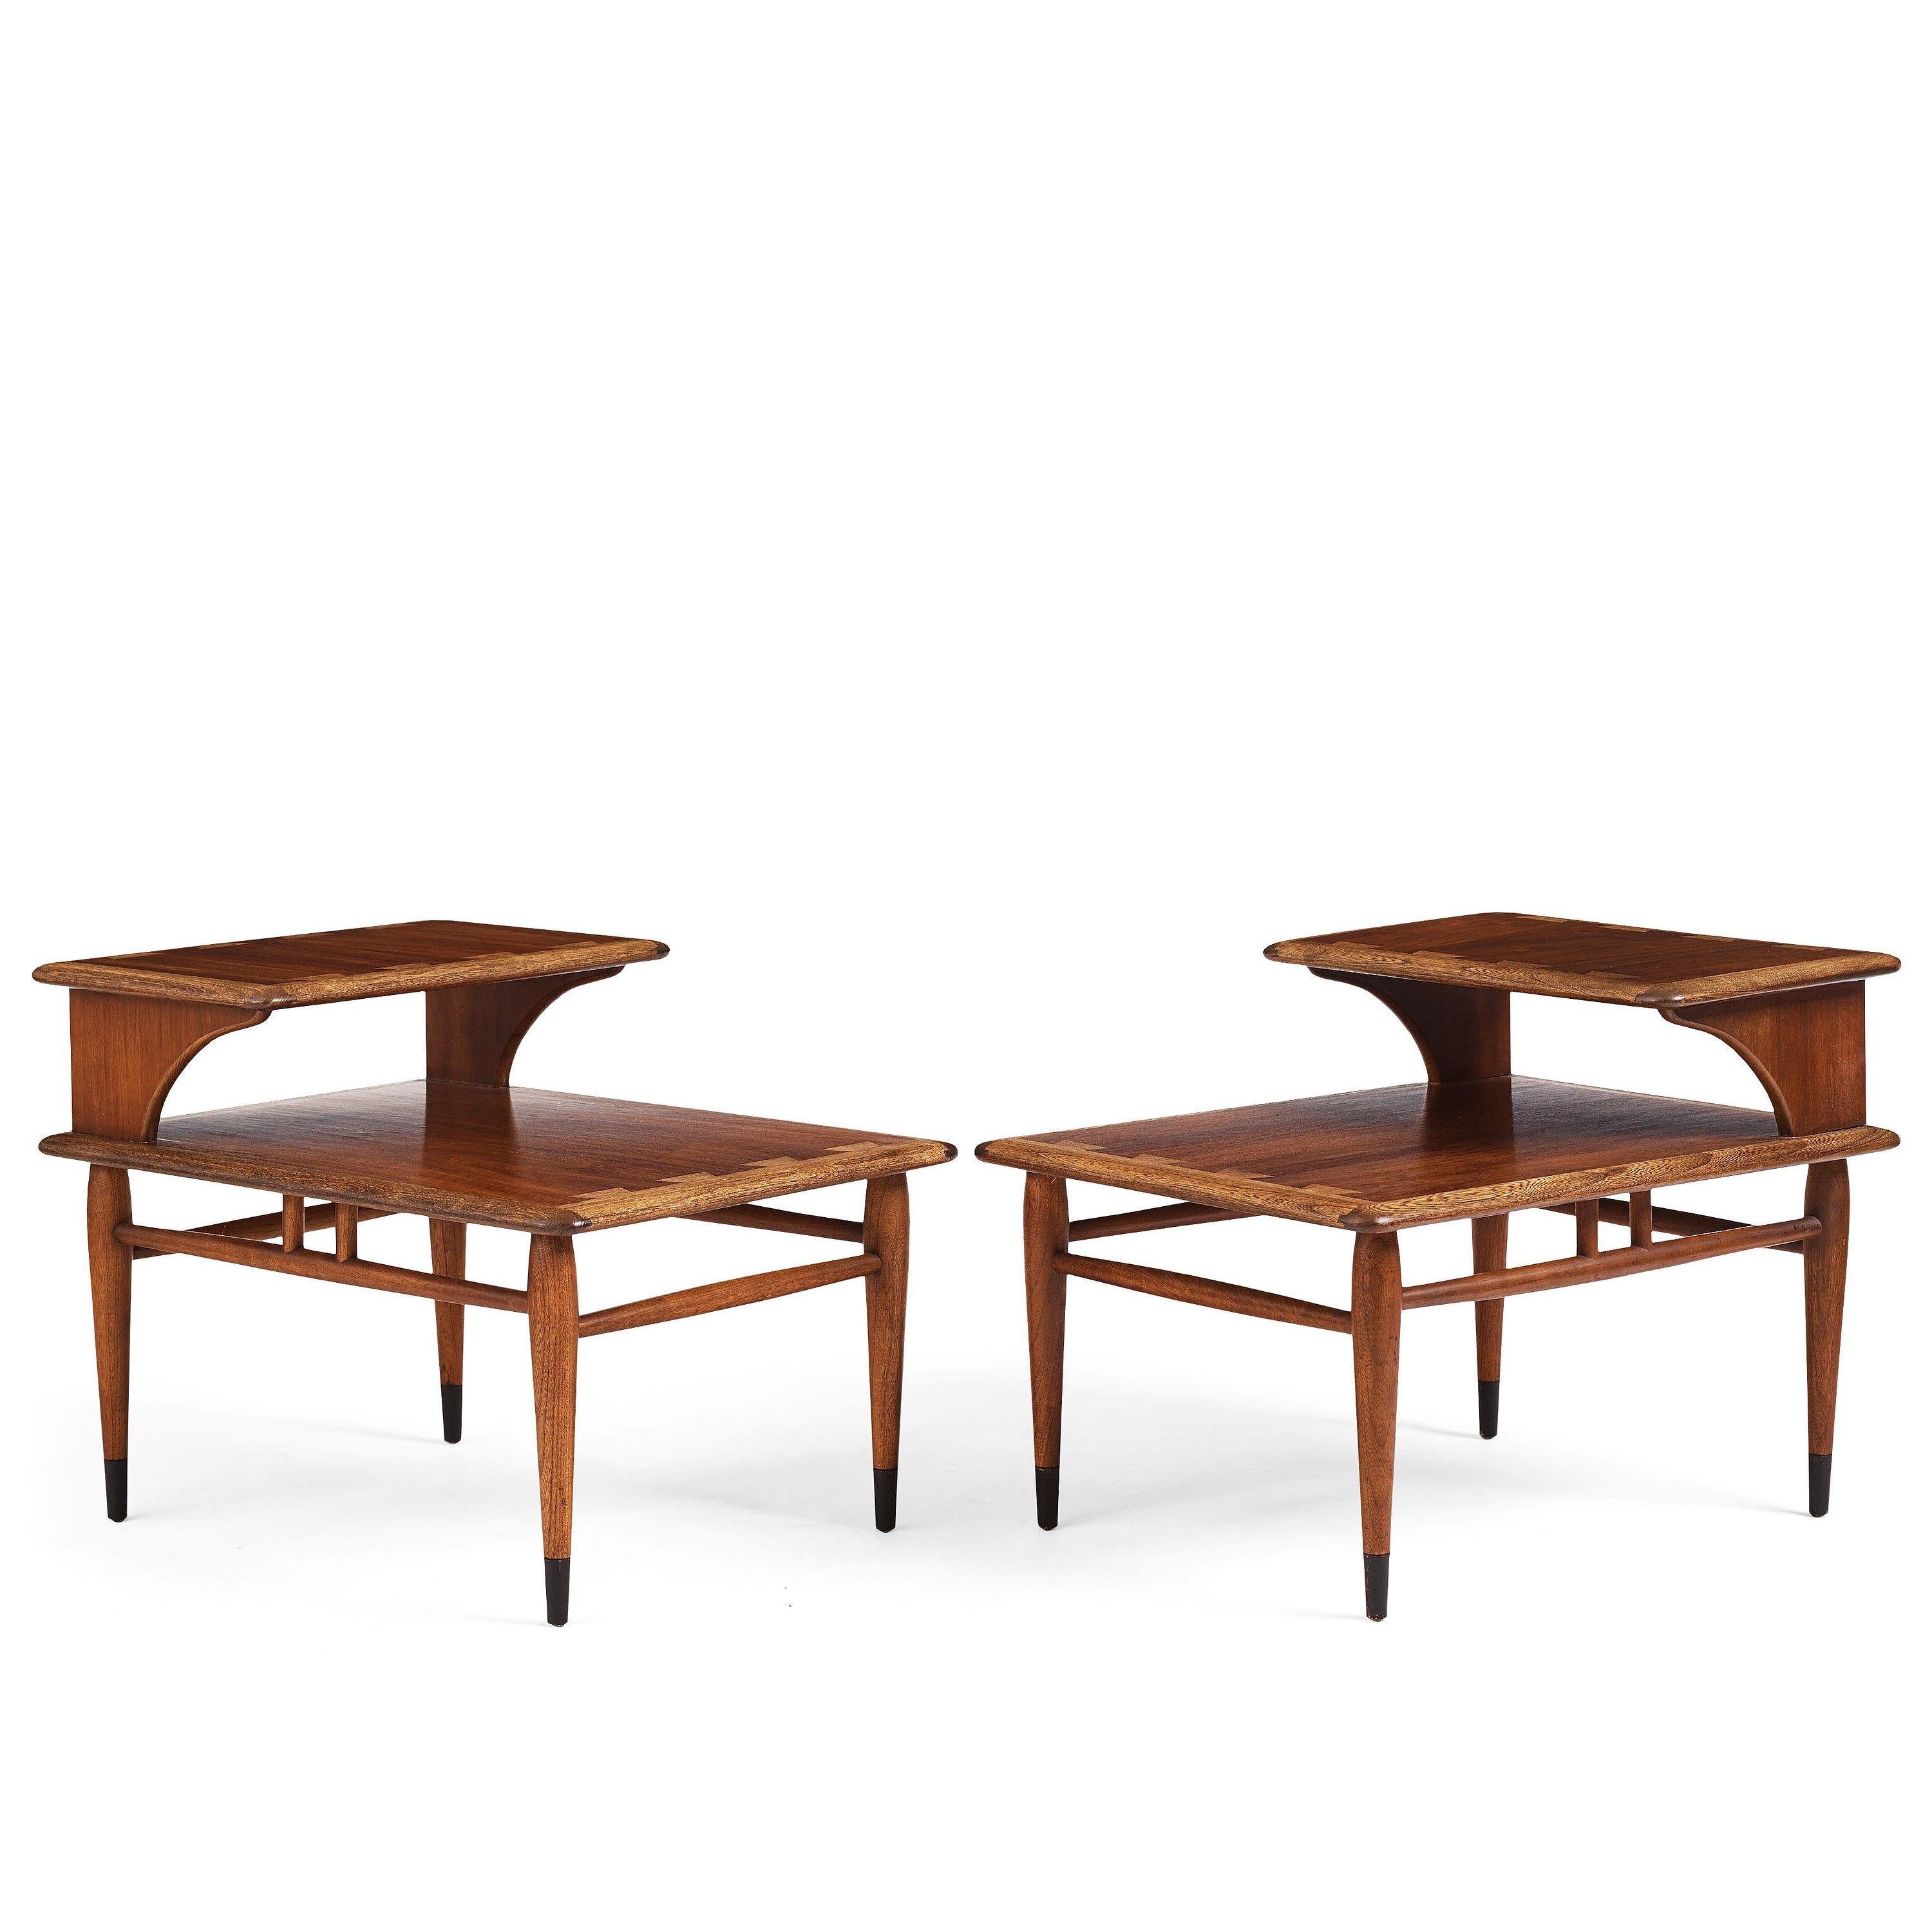 Andre Bus a Pair of 'Acclaim' Walnut Side Tables Forlane USA 1960 Signed For Sale 2